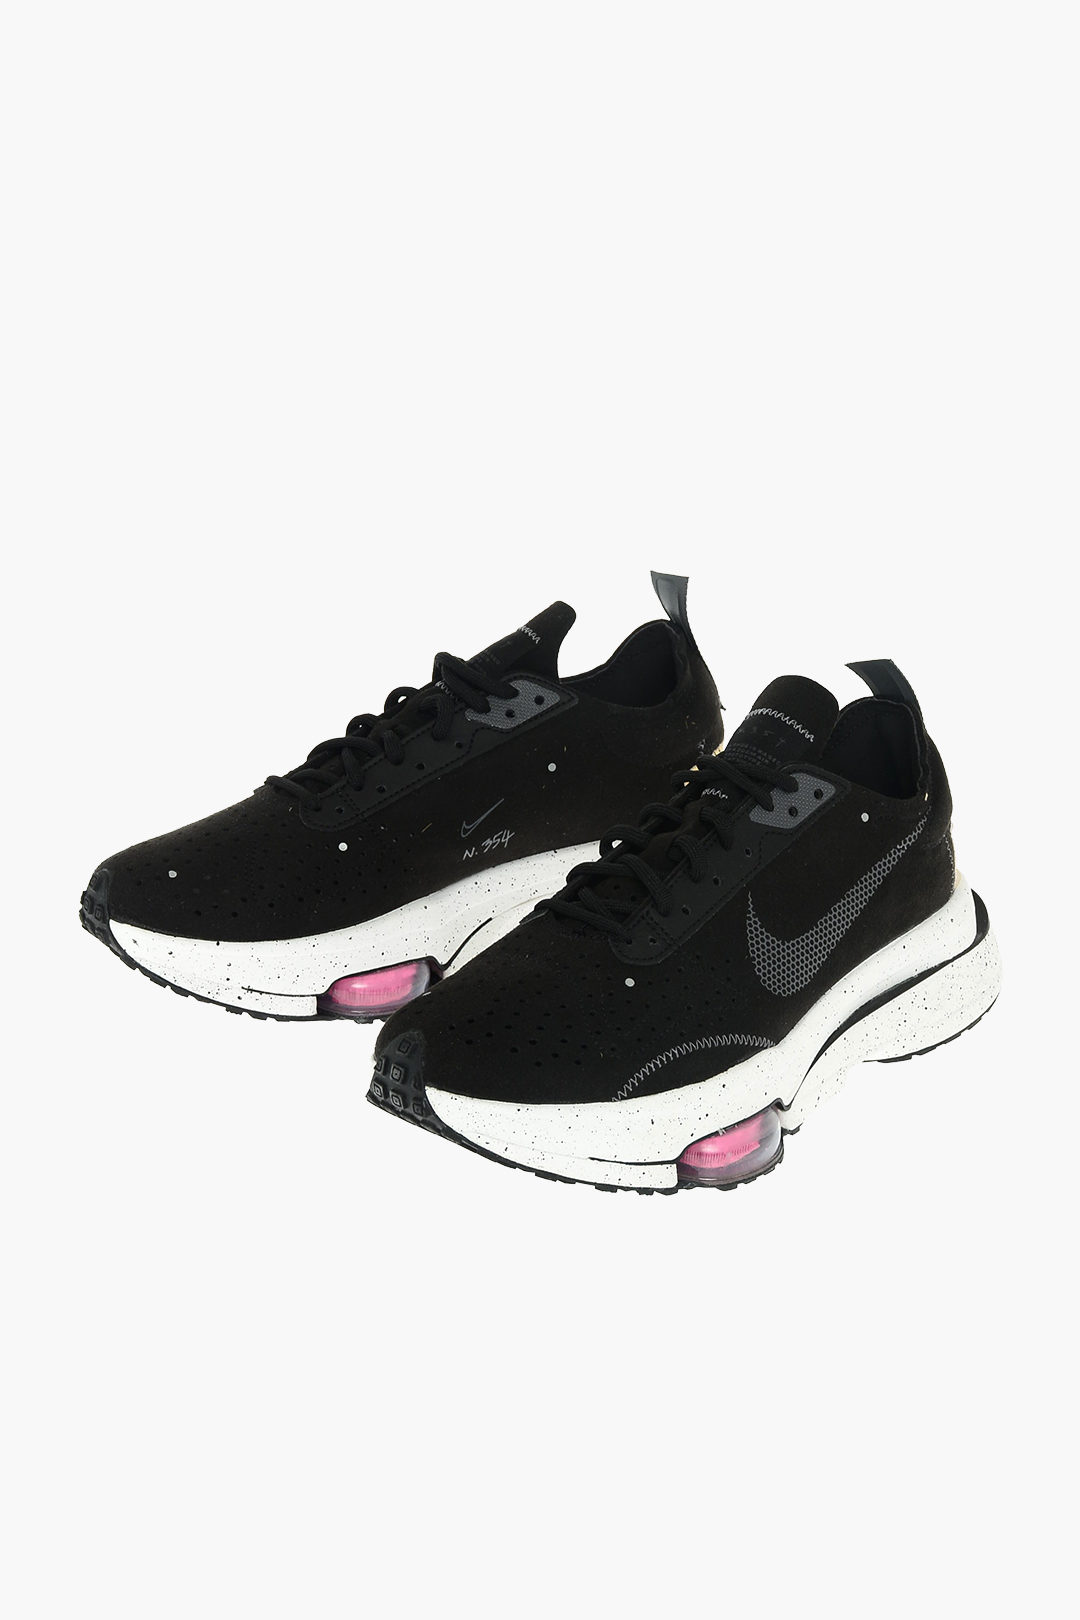 Melodieus wiel schudden Nike N.354 fabric AIR ZOOM - TYPE low-top sneakers with air bubble sole men  - Glamood Outlet